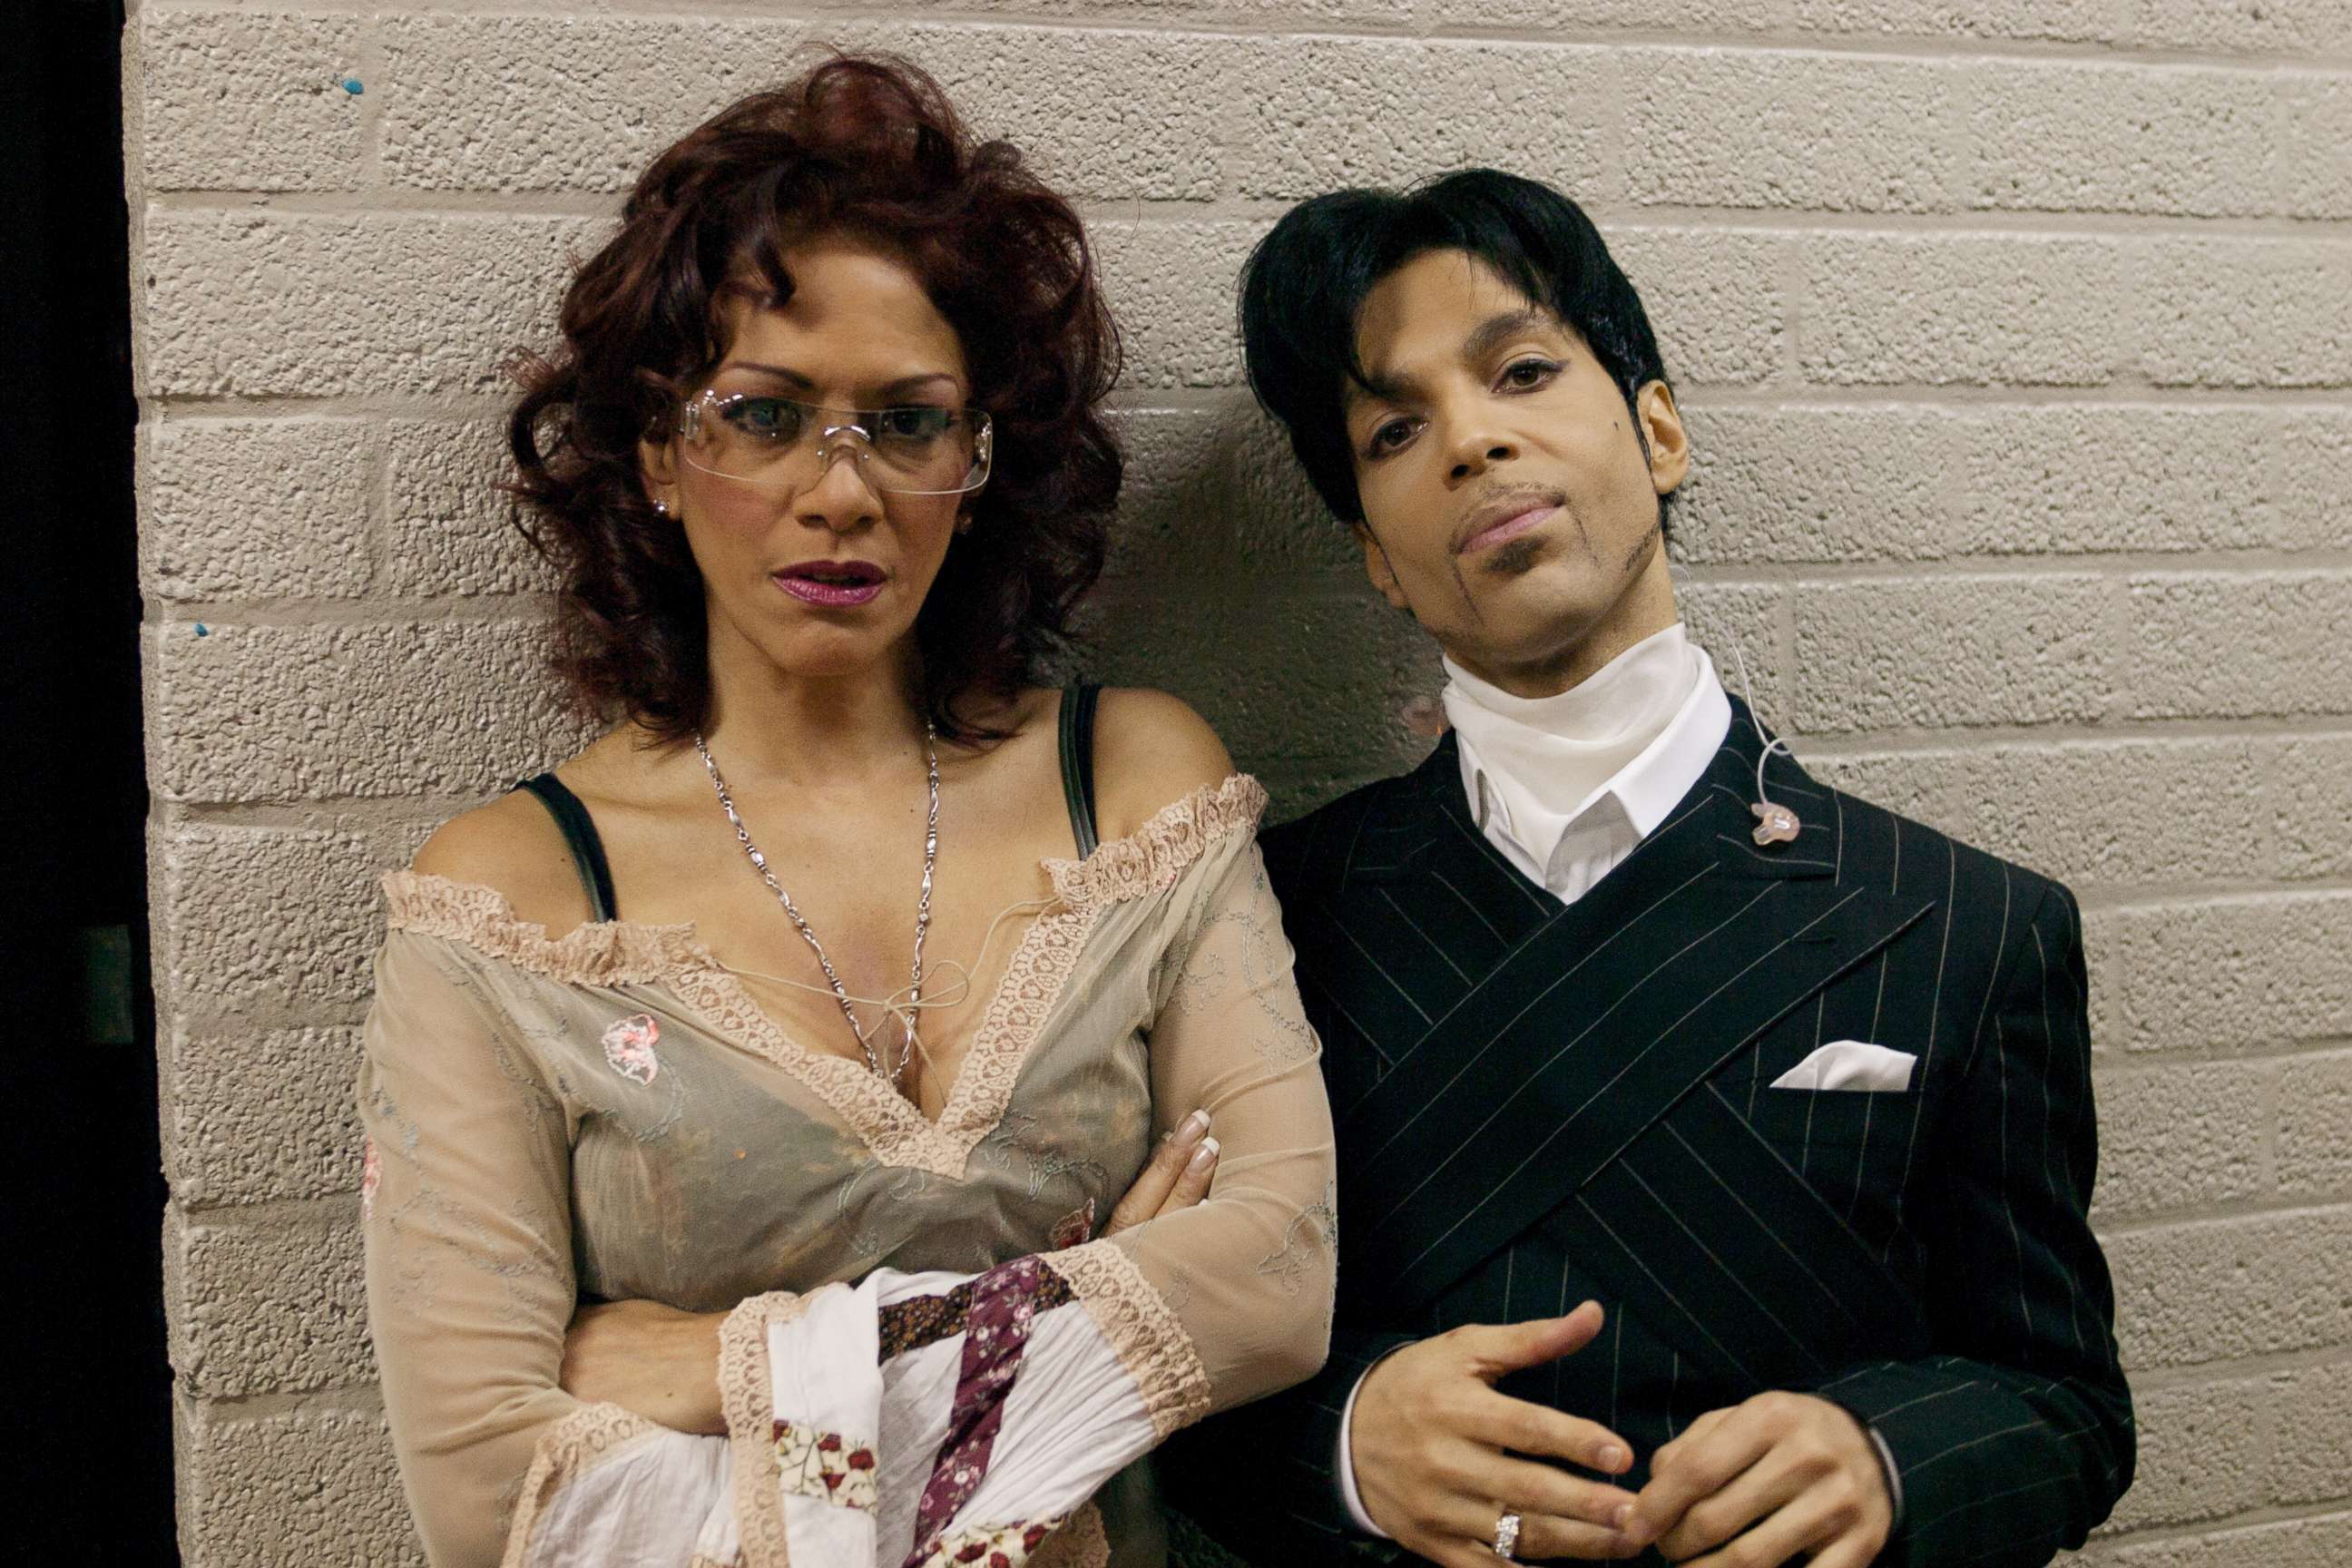 PHOTO:  Prince and Sheila E are photographed backstage on Prince's "One Nite Alone Tour" in 2002.